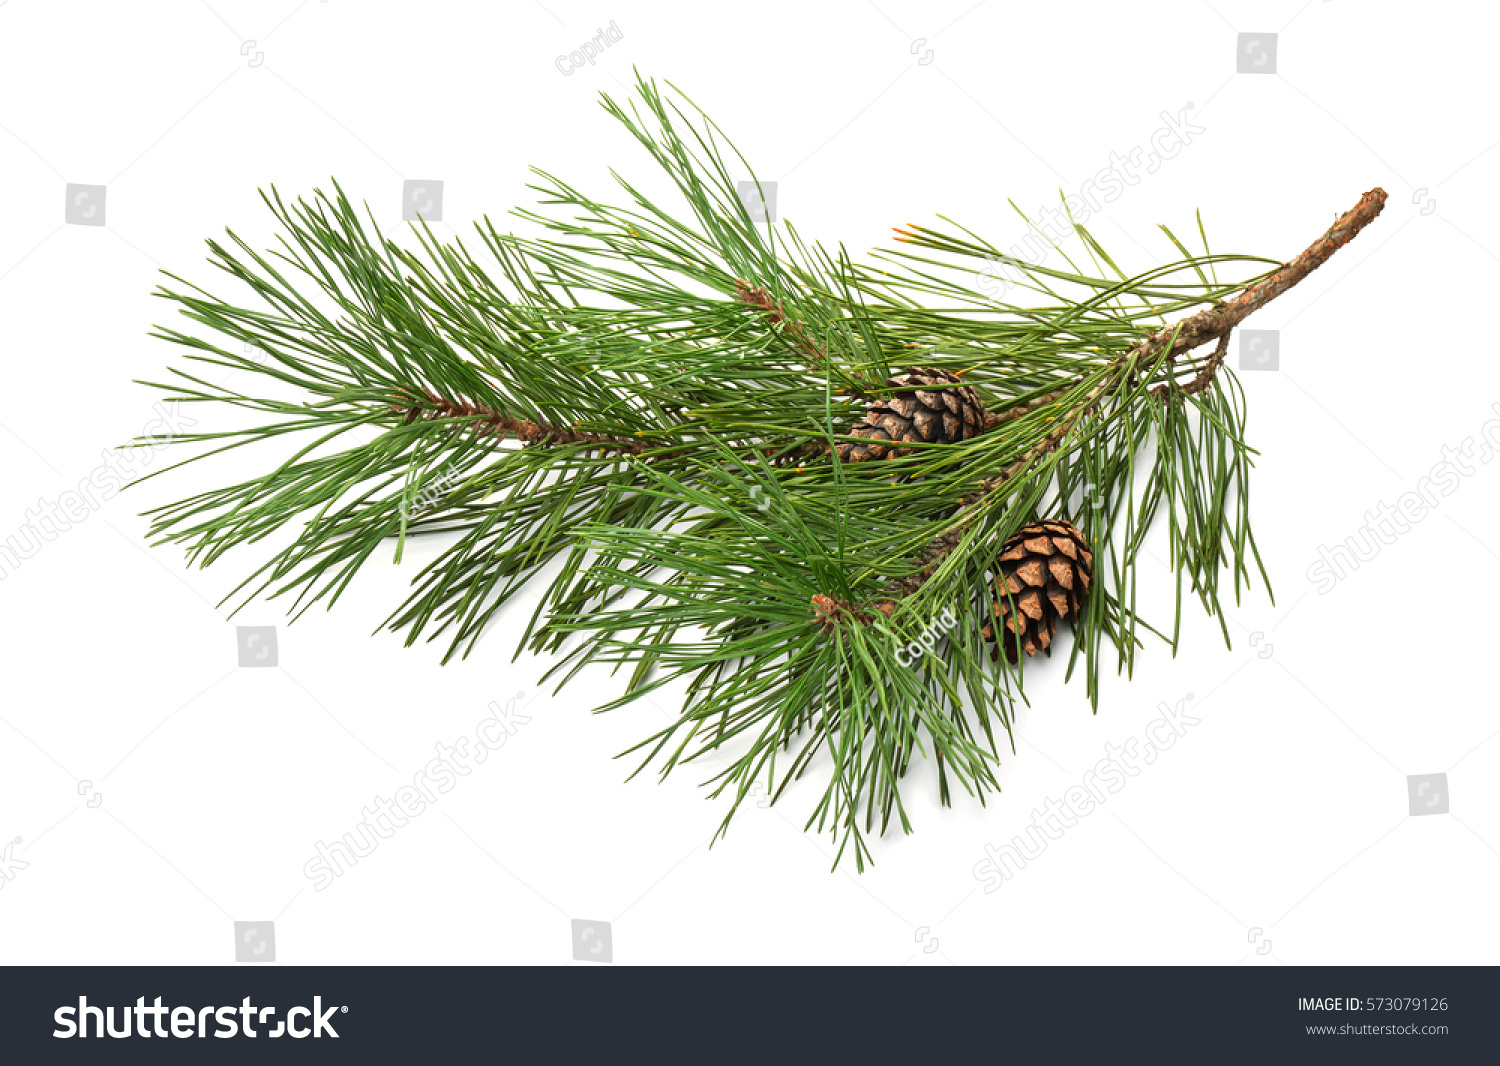 Pine tree branch and cones isolated on white #573079126